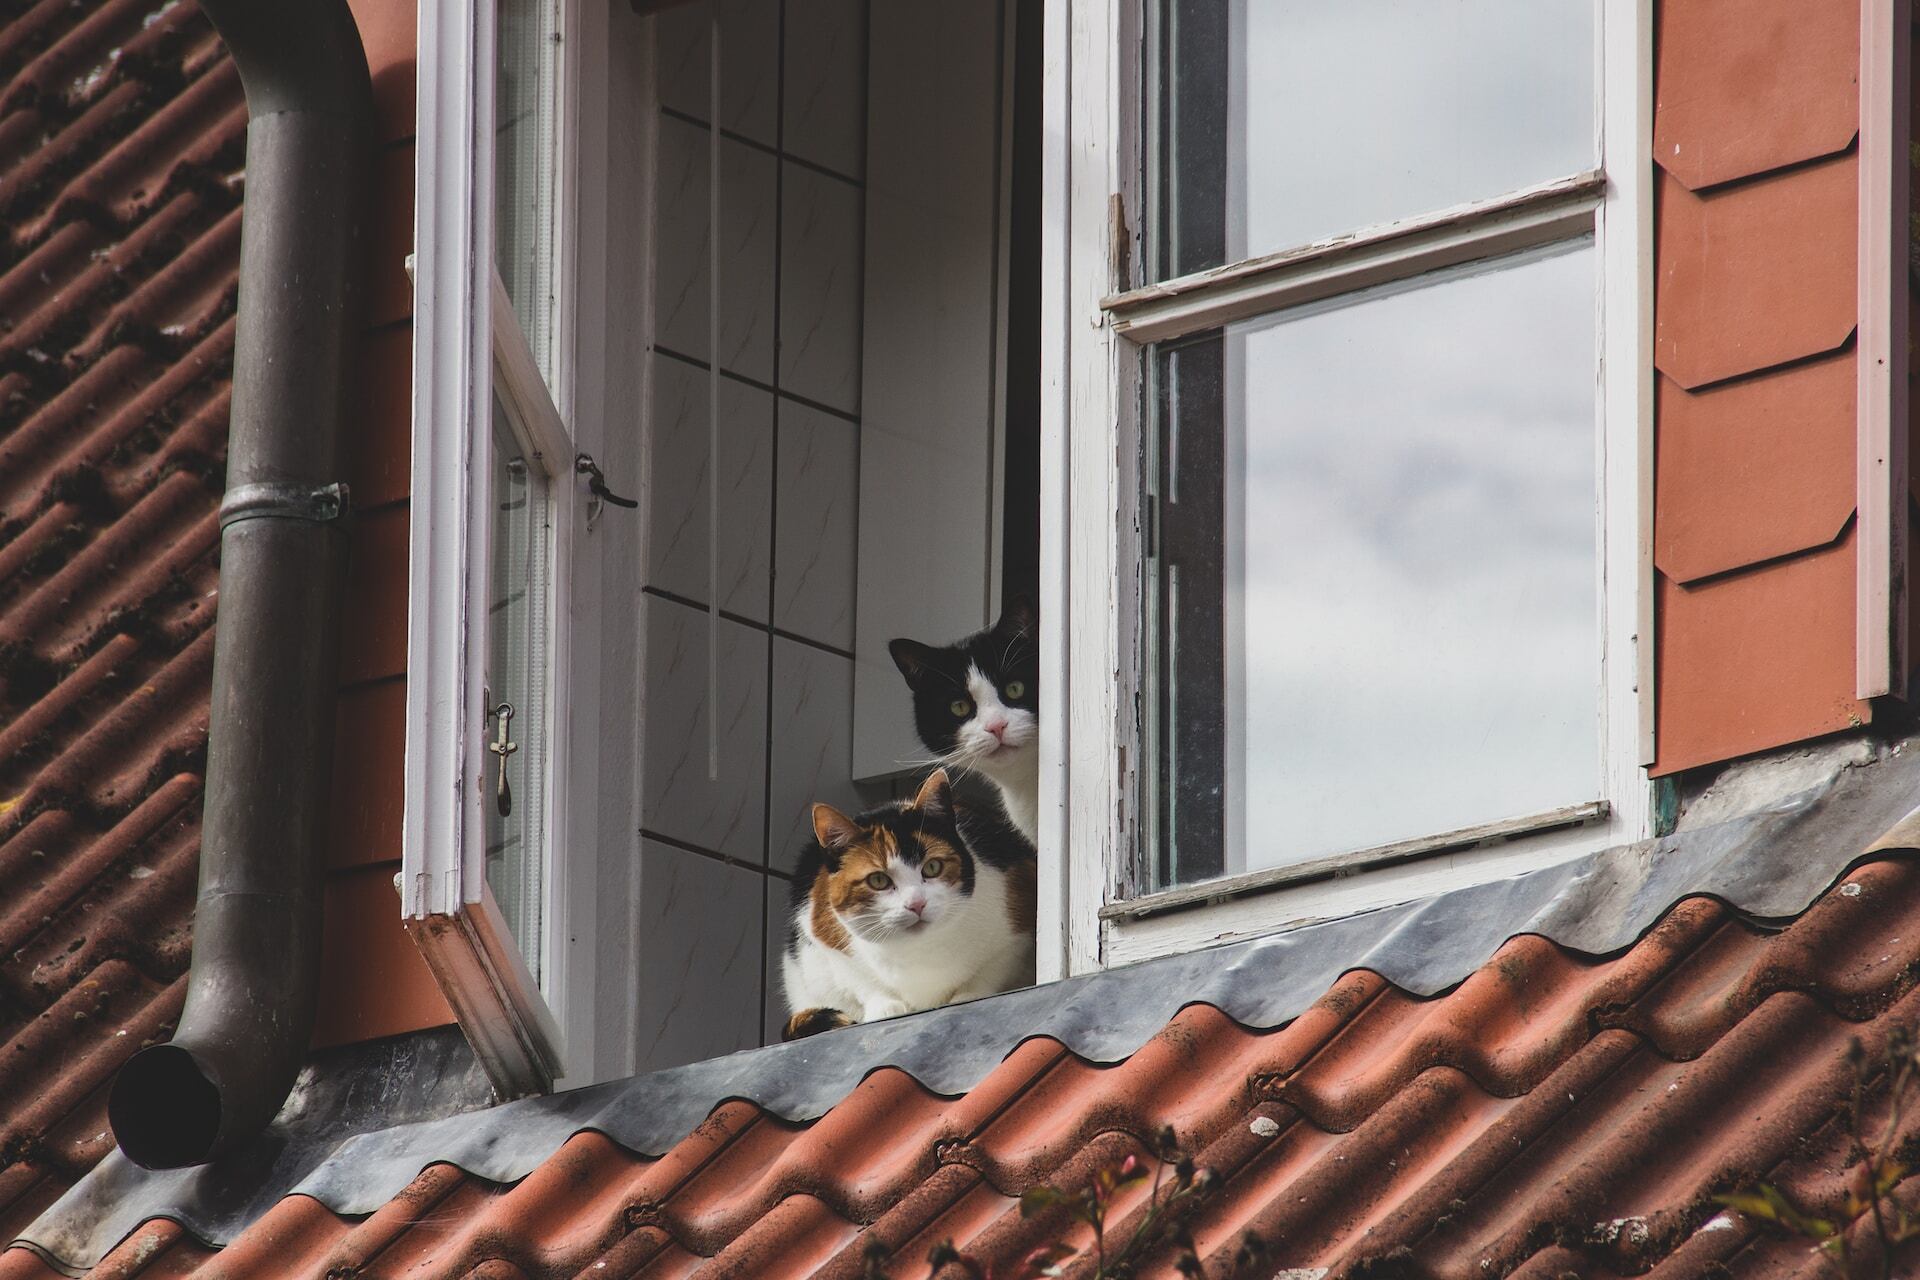 A pair of cats sitting by an open window overlooking a roof